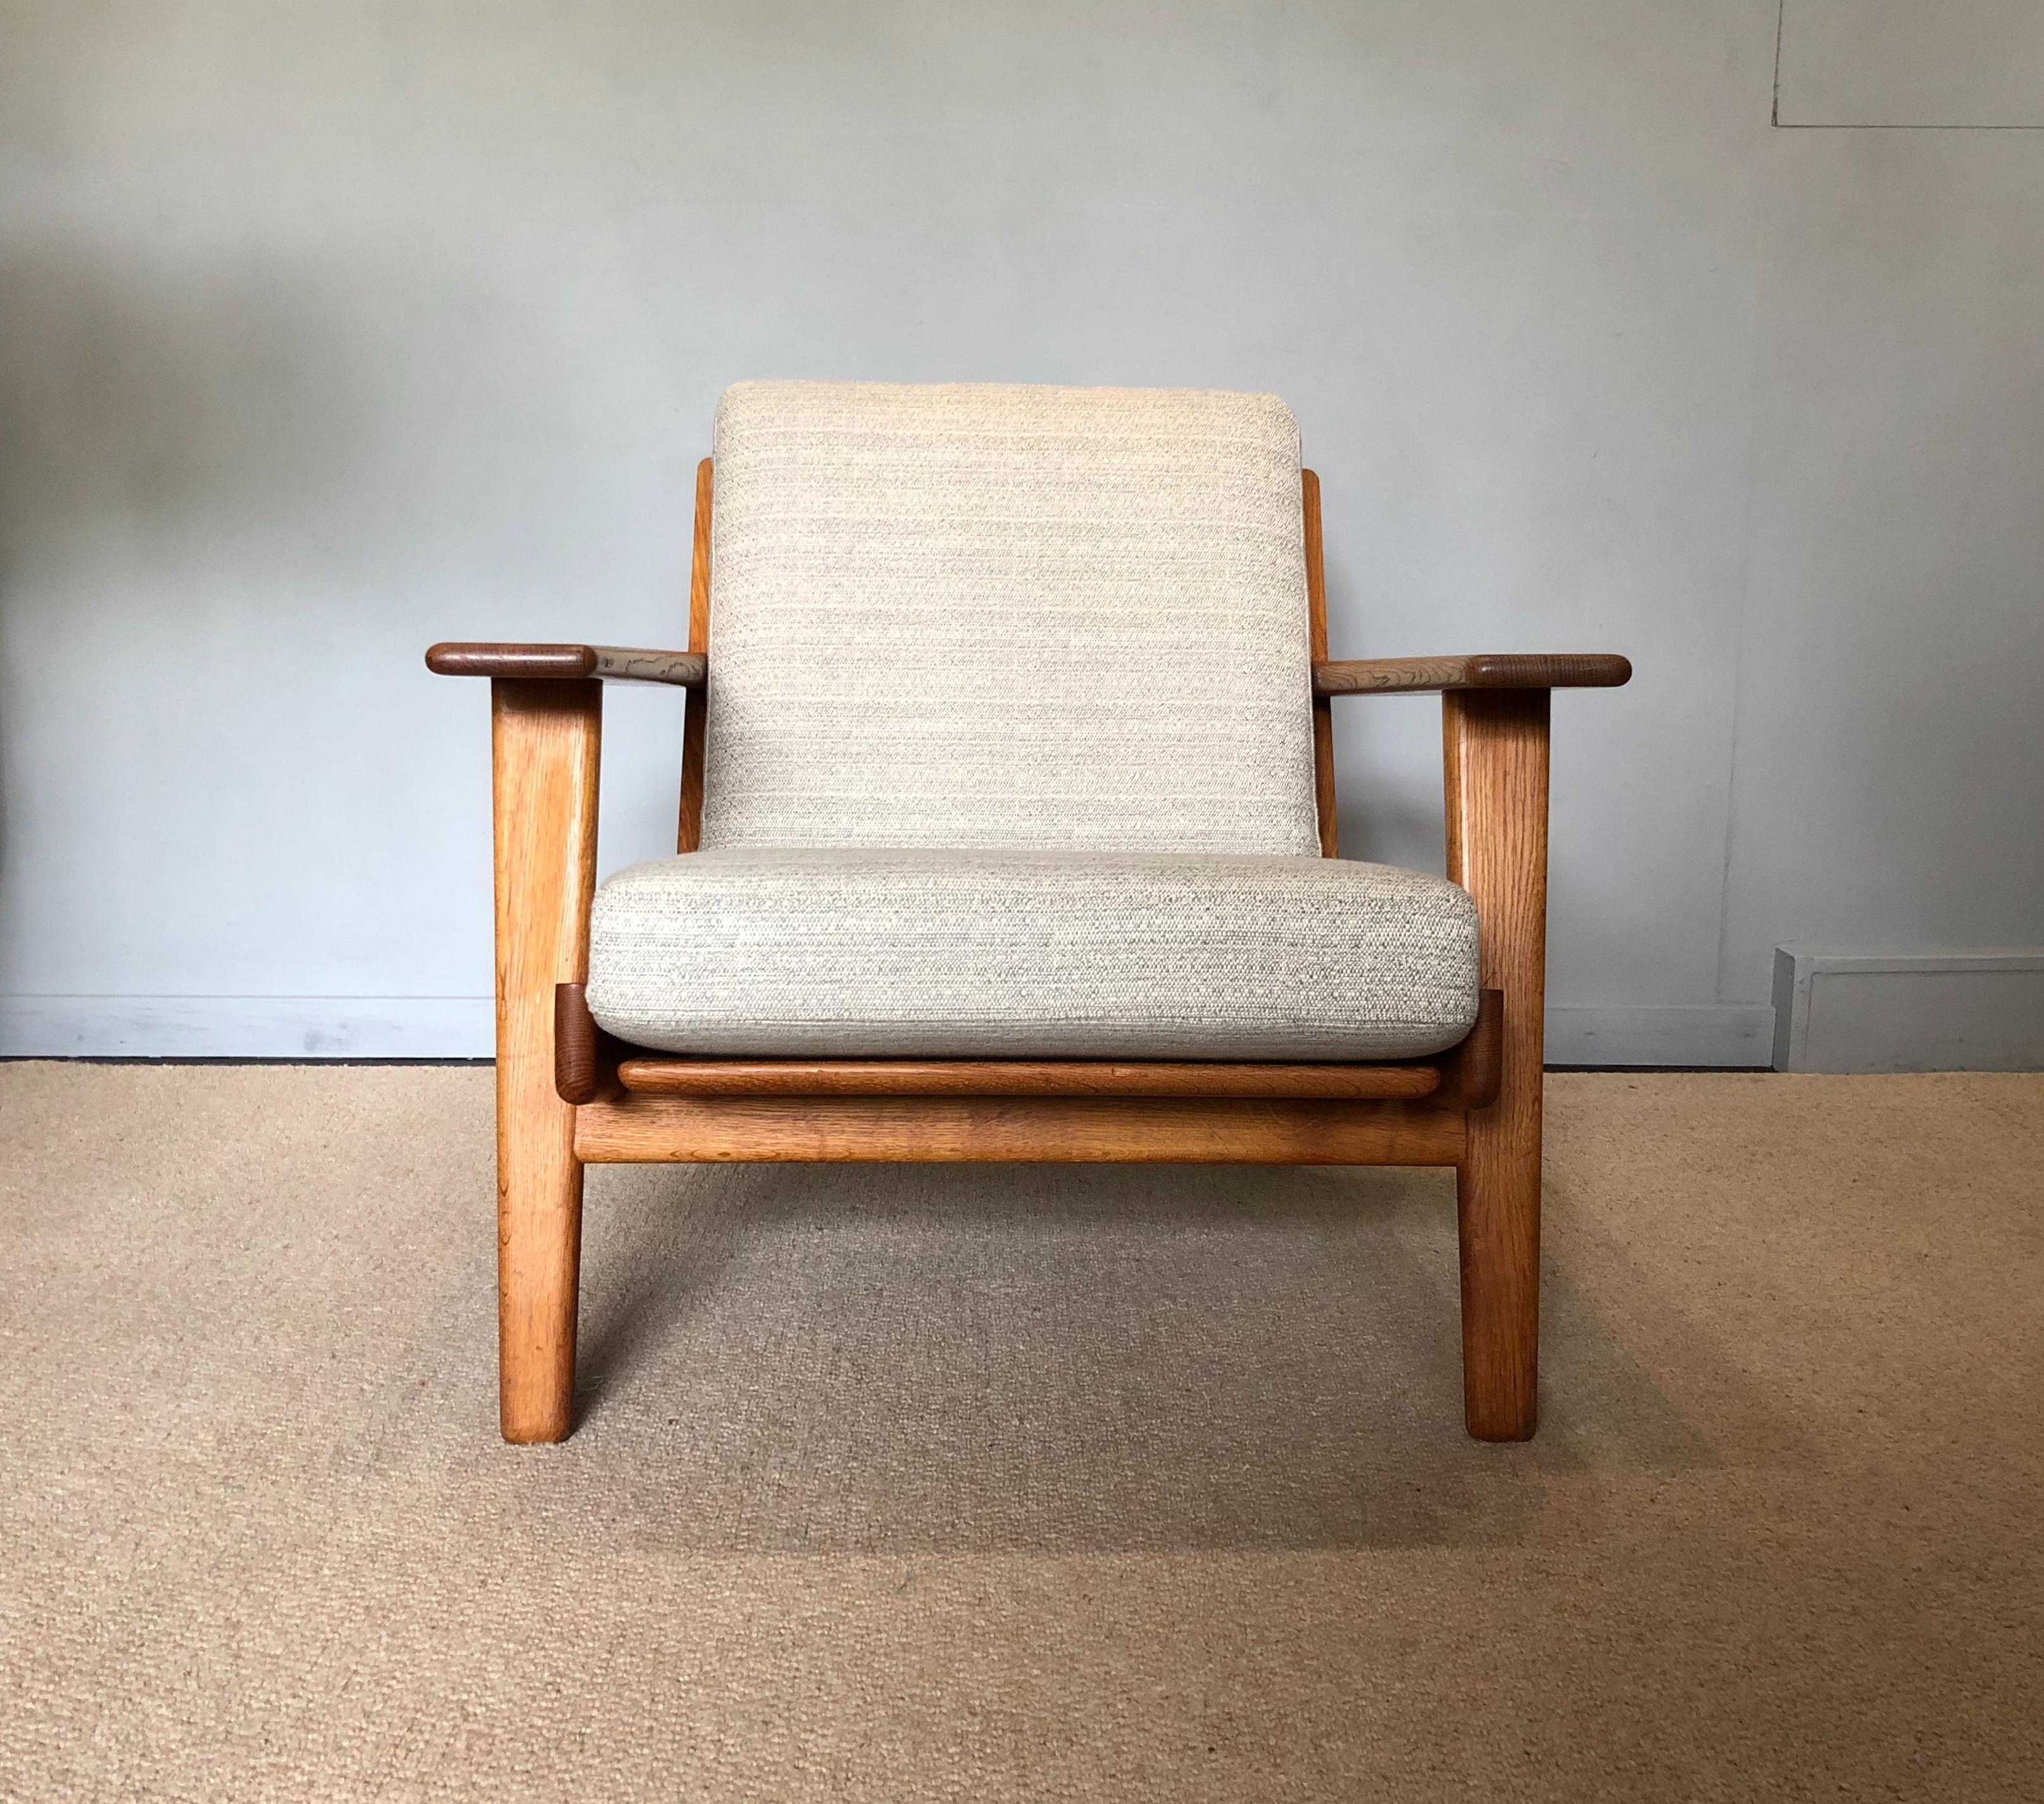 A wonderful original example of the Hans J Wegner ge290 lounge chair. This early model was produced by Getama, Denmark, circa 1950. Golden European oak frame with new Dedar fabric reupholstery. Otherwise known as the plank chair this is one of Hans